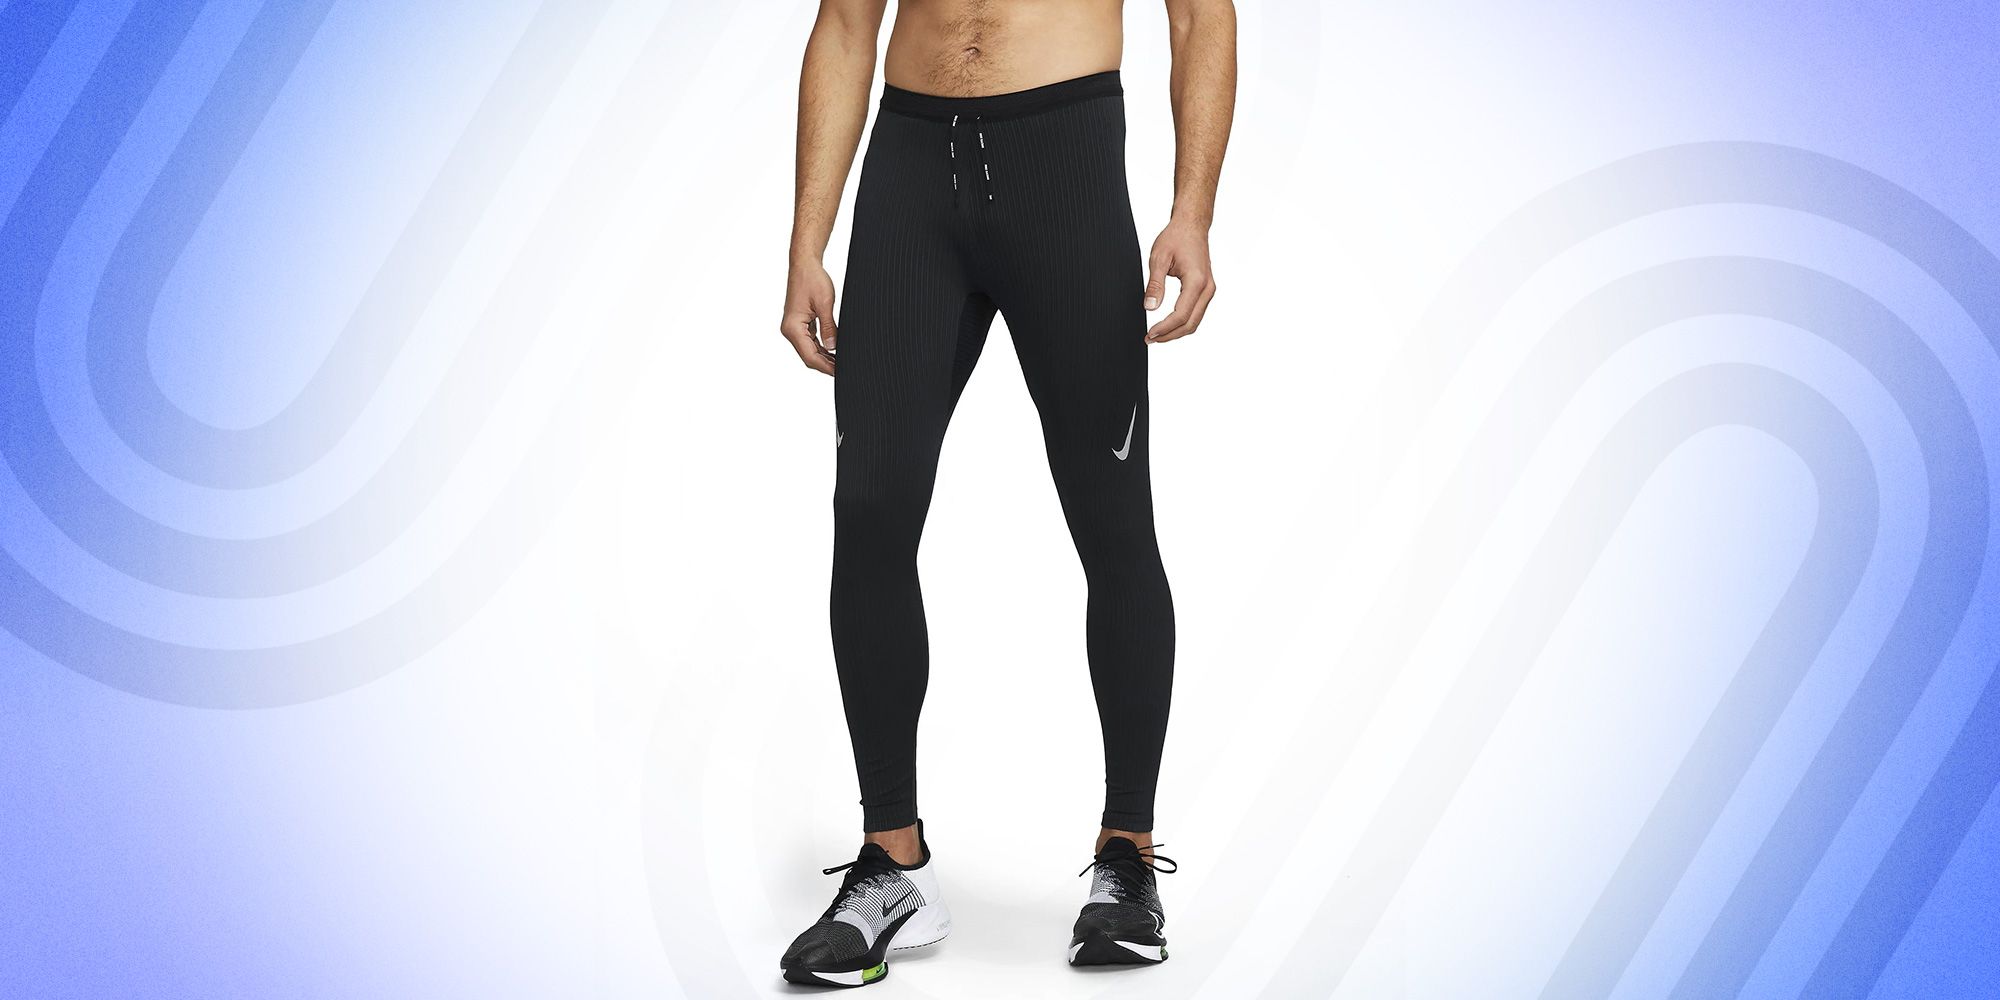 Sillictor Compression Tights for Men Running Leggings High Wicking Base Layer Sports Leggings Breathable Durable Quick Dry Thermal Mens Running Tights 